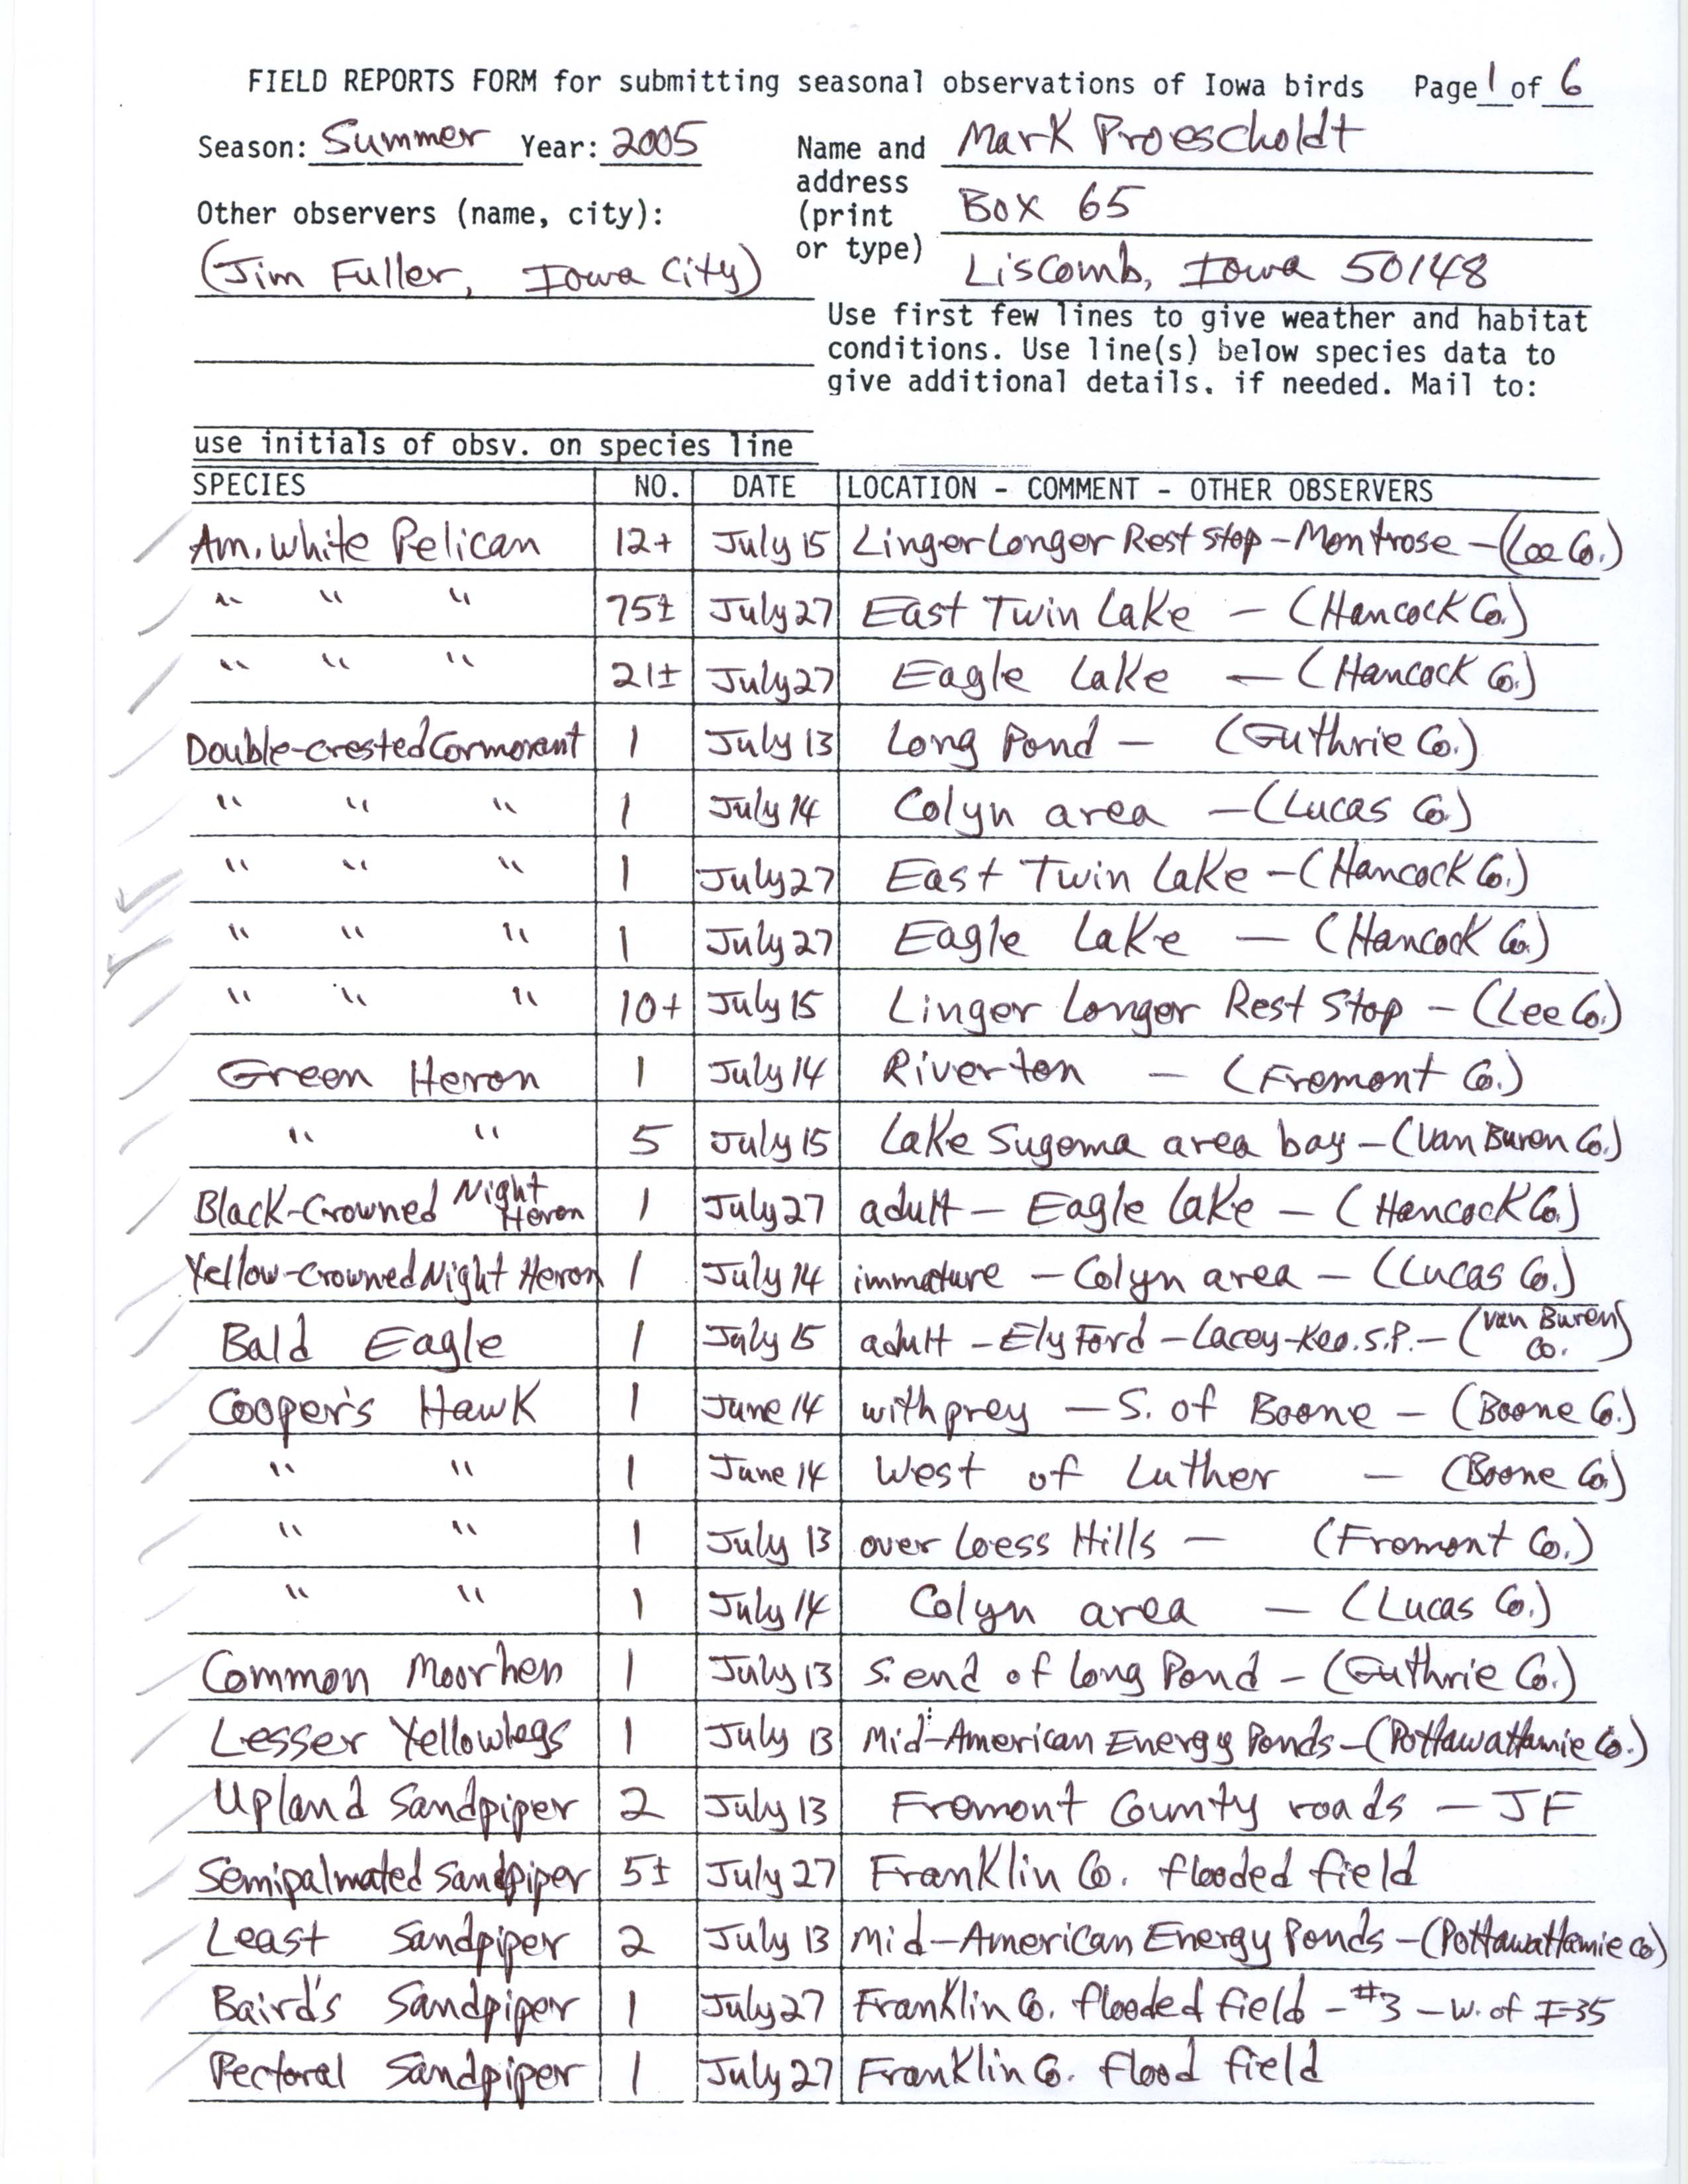 Field reports form for submitting seasonal observations of Iowa birds, Mark Proescholdt, summer 2005